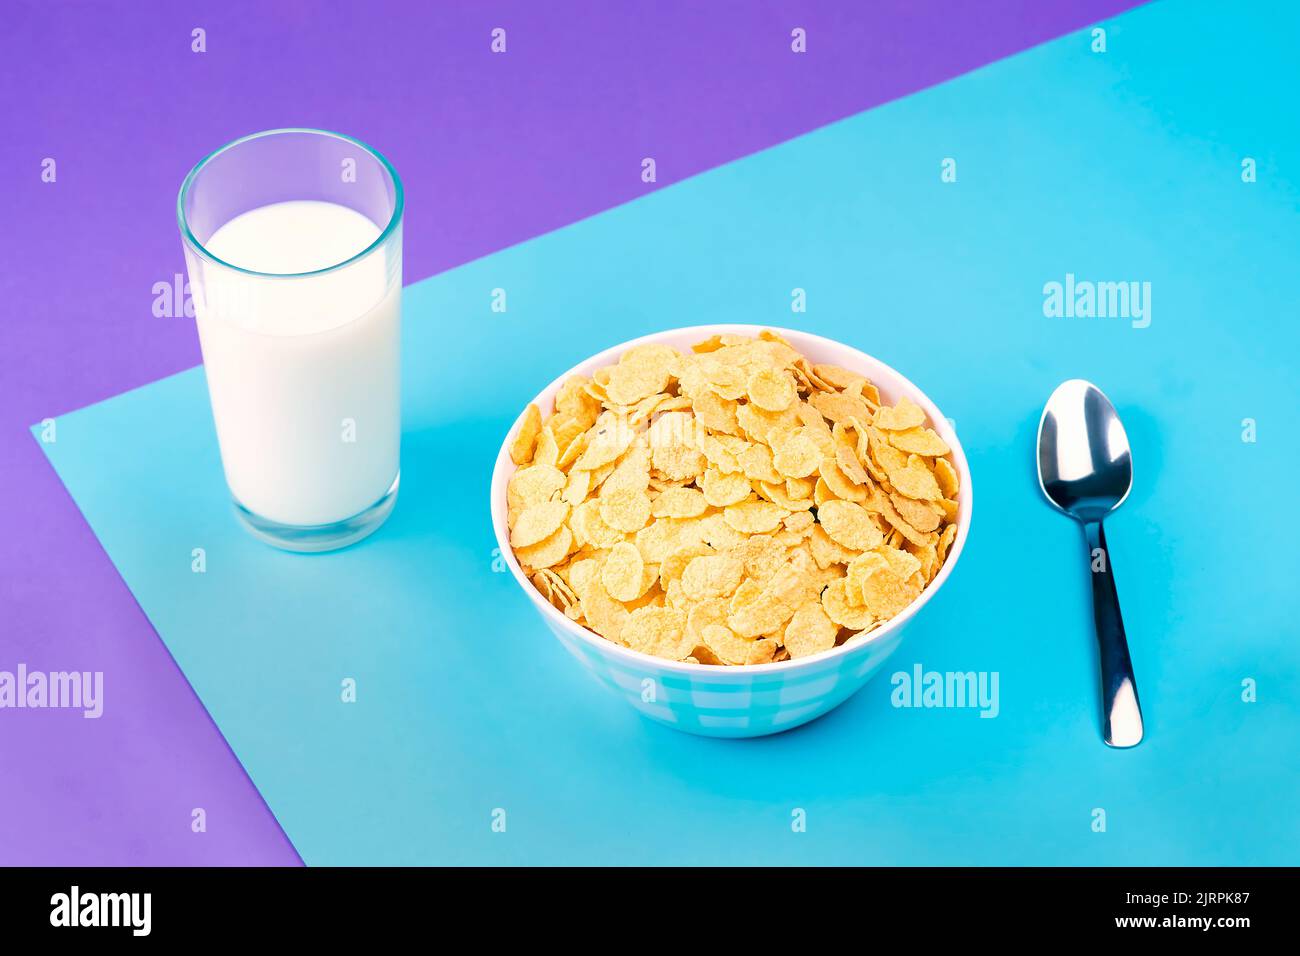 View of a plate with natural cereal and a glass of fresh milk against a background of pastel colors. Stock Photo